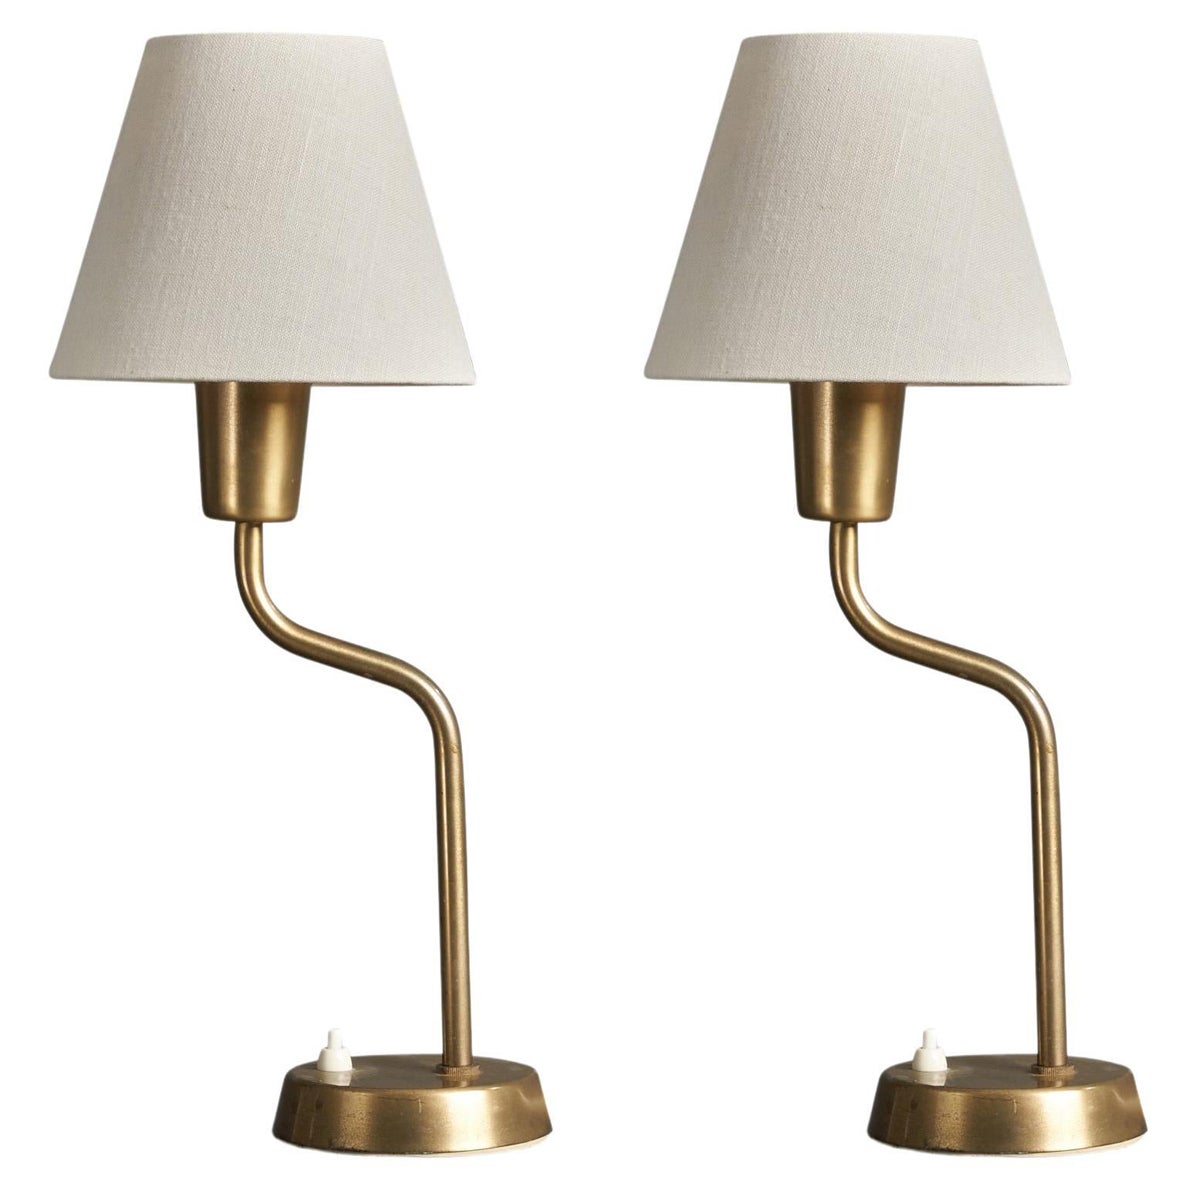 ASEA, Table Lamps, Brass, Fabric, Sweden, 1940s